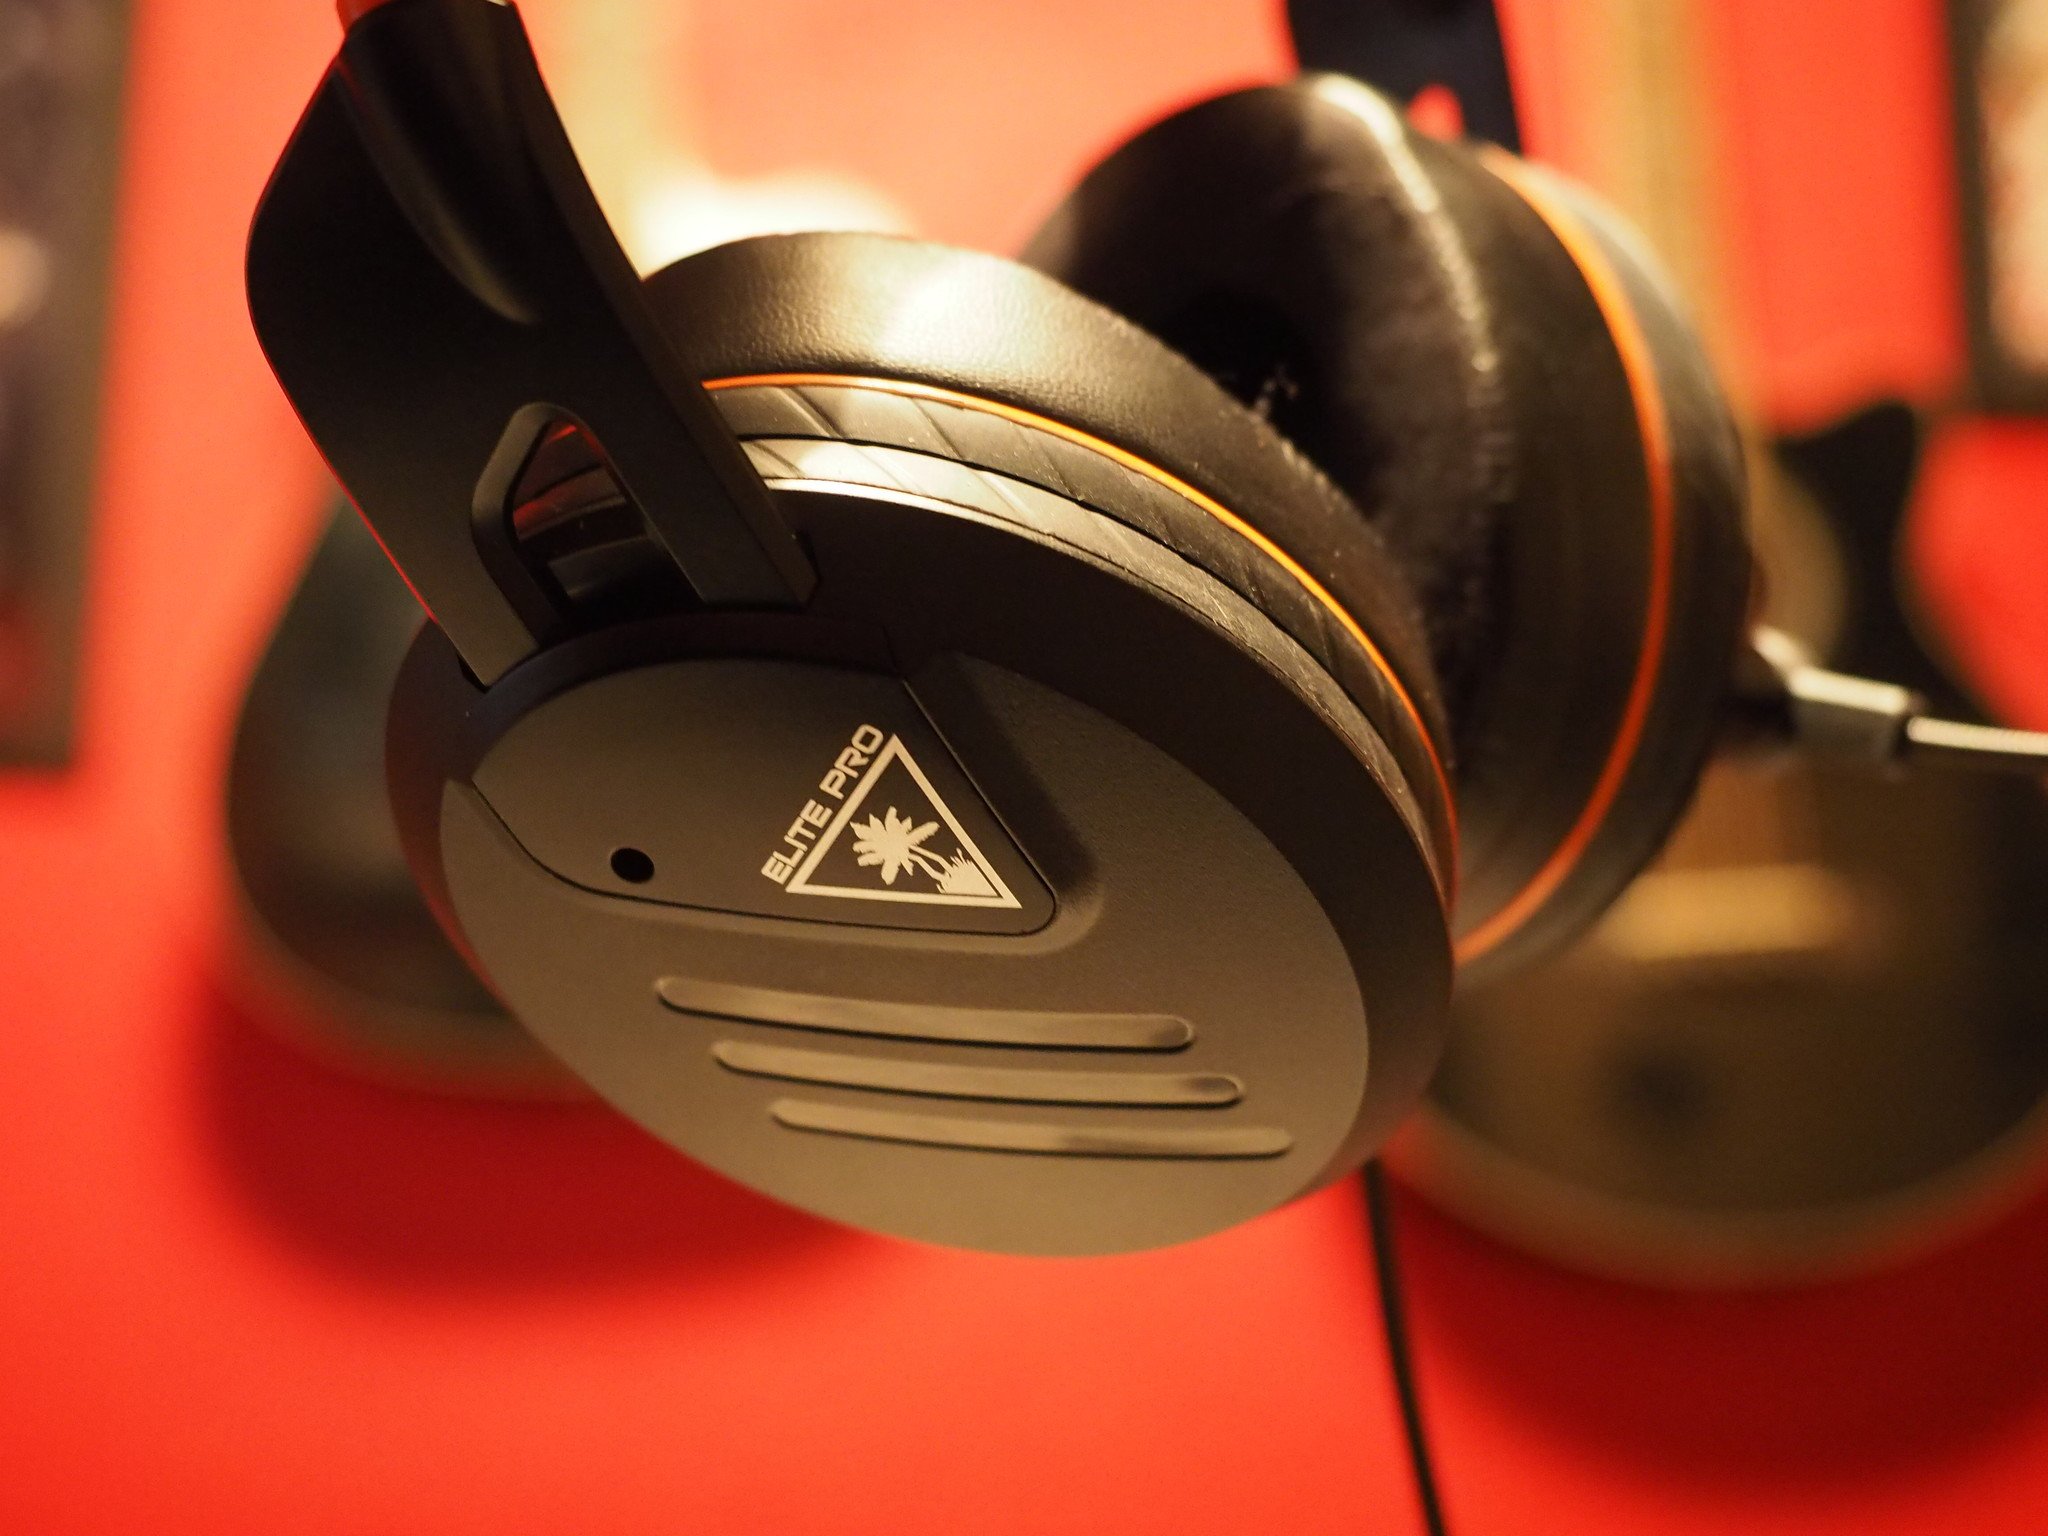 Turtle Beach Elite Pro Tournament headset for Xbox and PC review